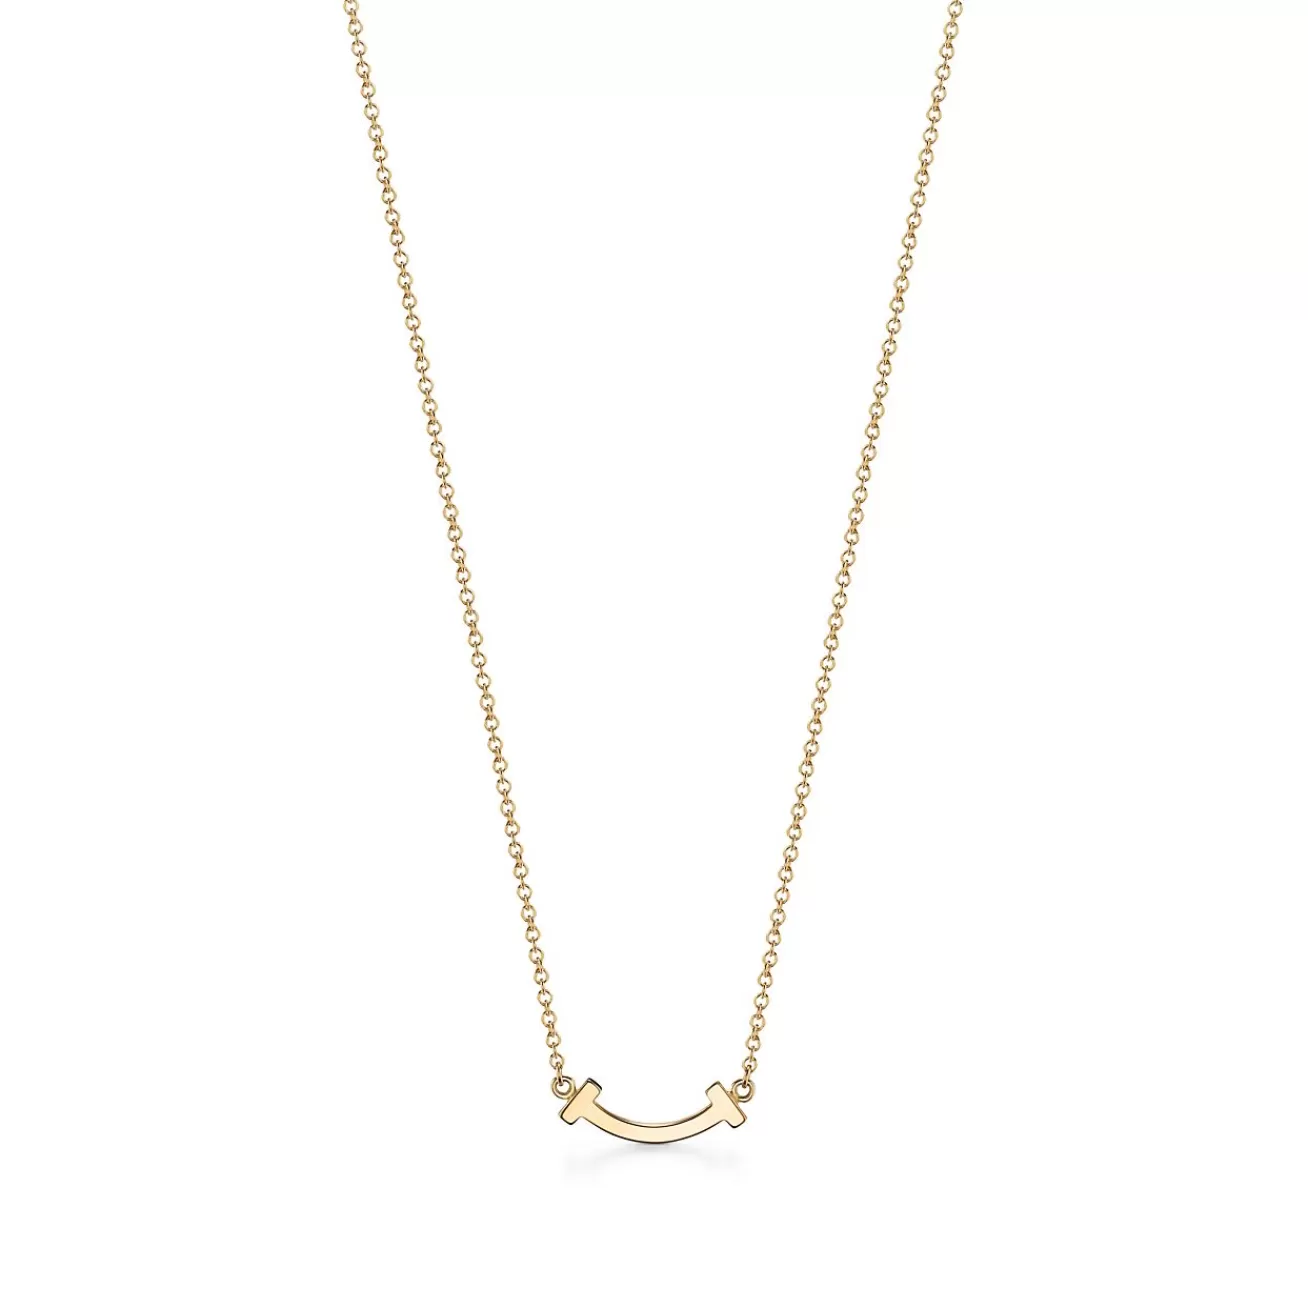 Tiffany & Co. Tiffany T smile pendant in 18k gold, mini. | ^ Necklaces & Pendants | Gifts for Her